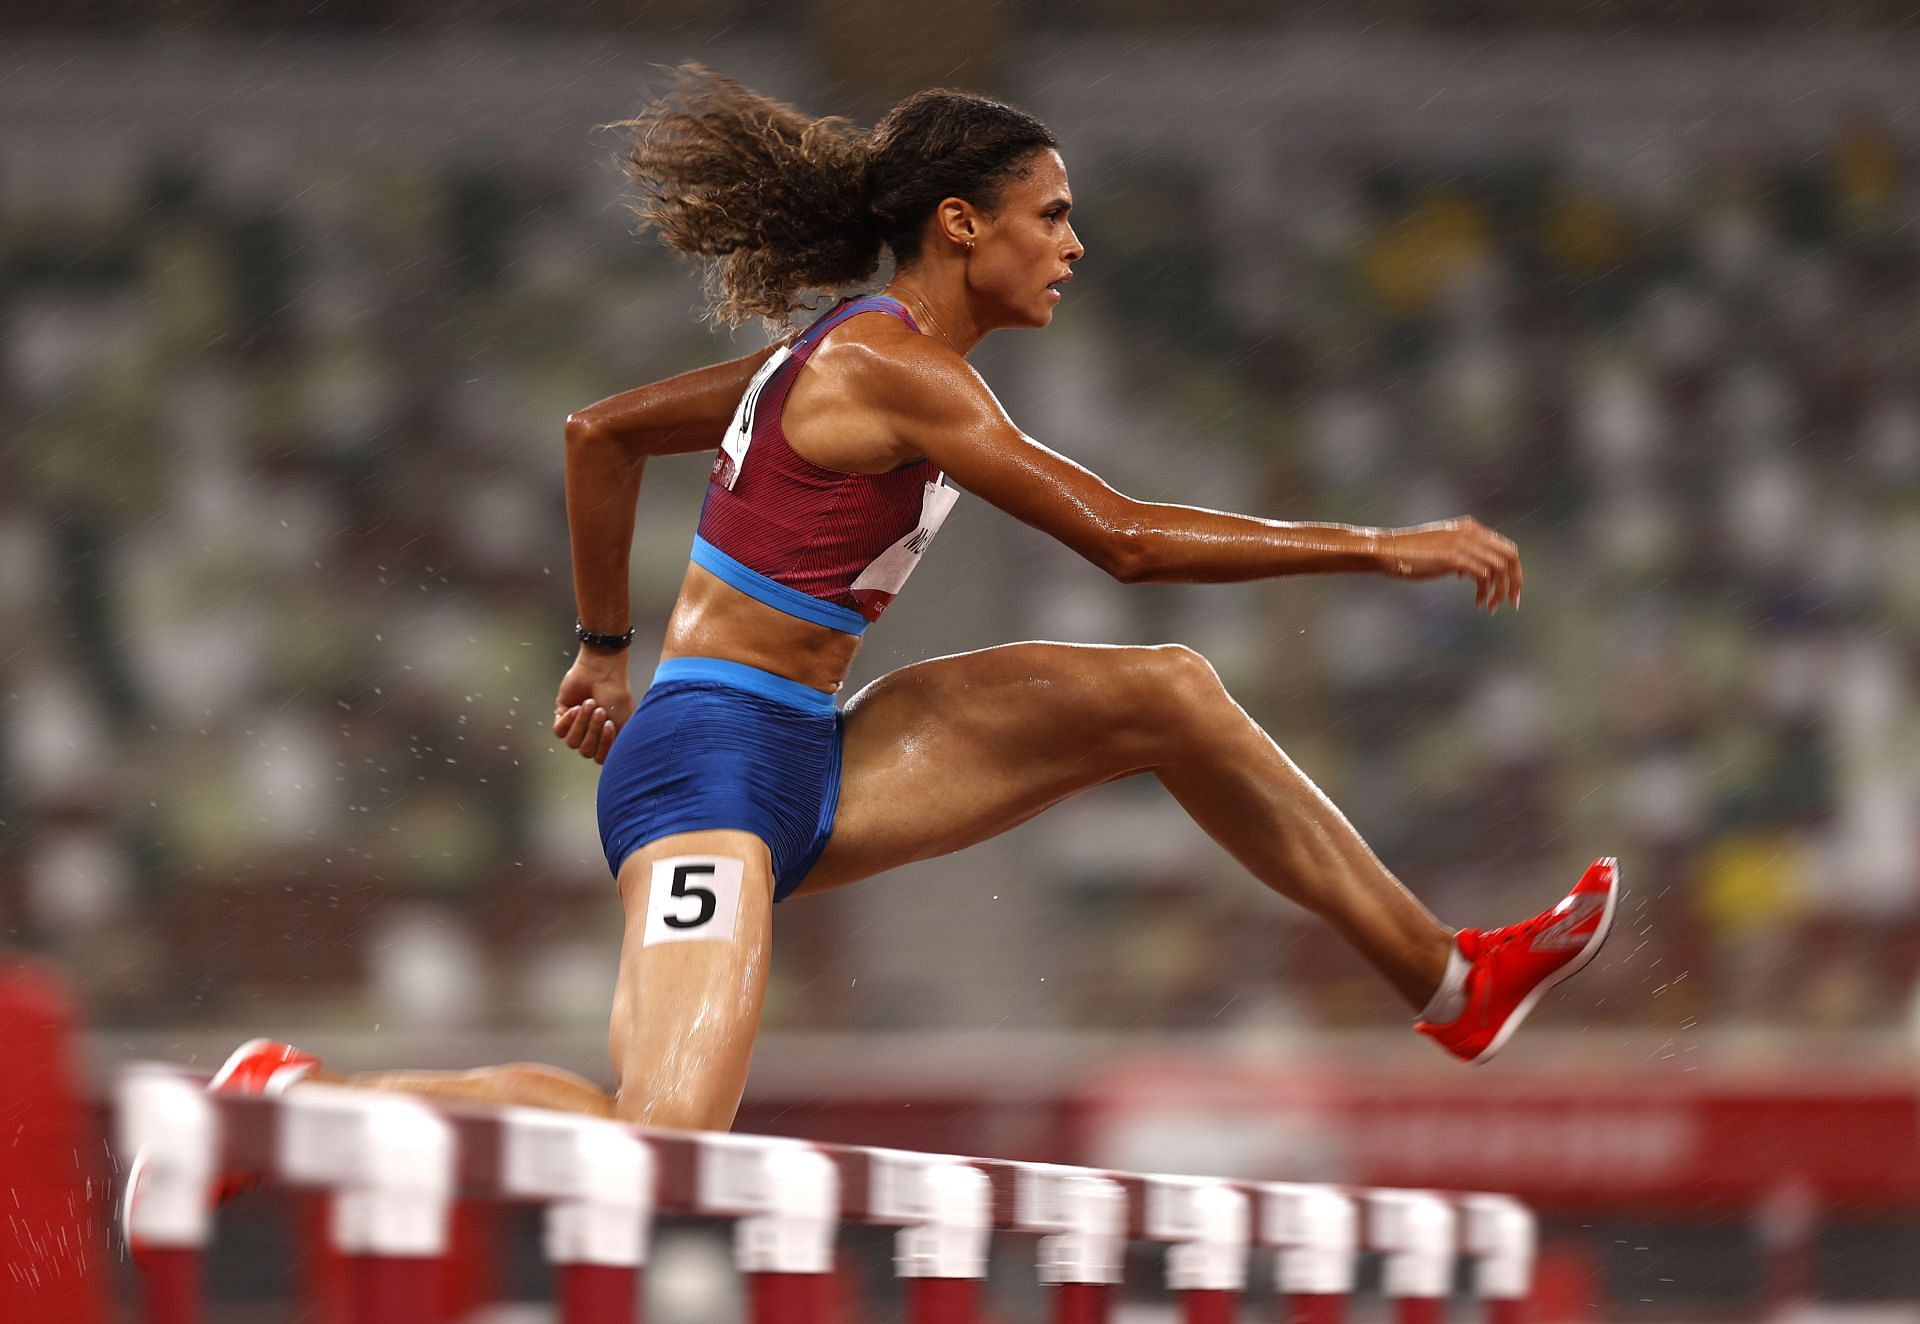 Sydney McLaughlin at the Tokyo Olympics: Day 10 (Image via Ezra Shaw/Getty Images)